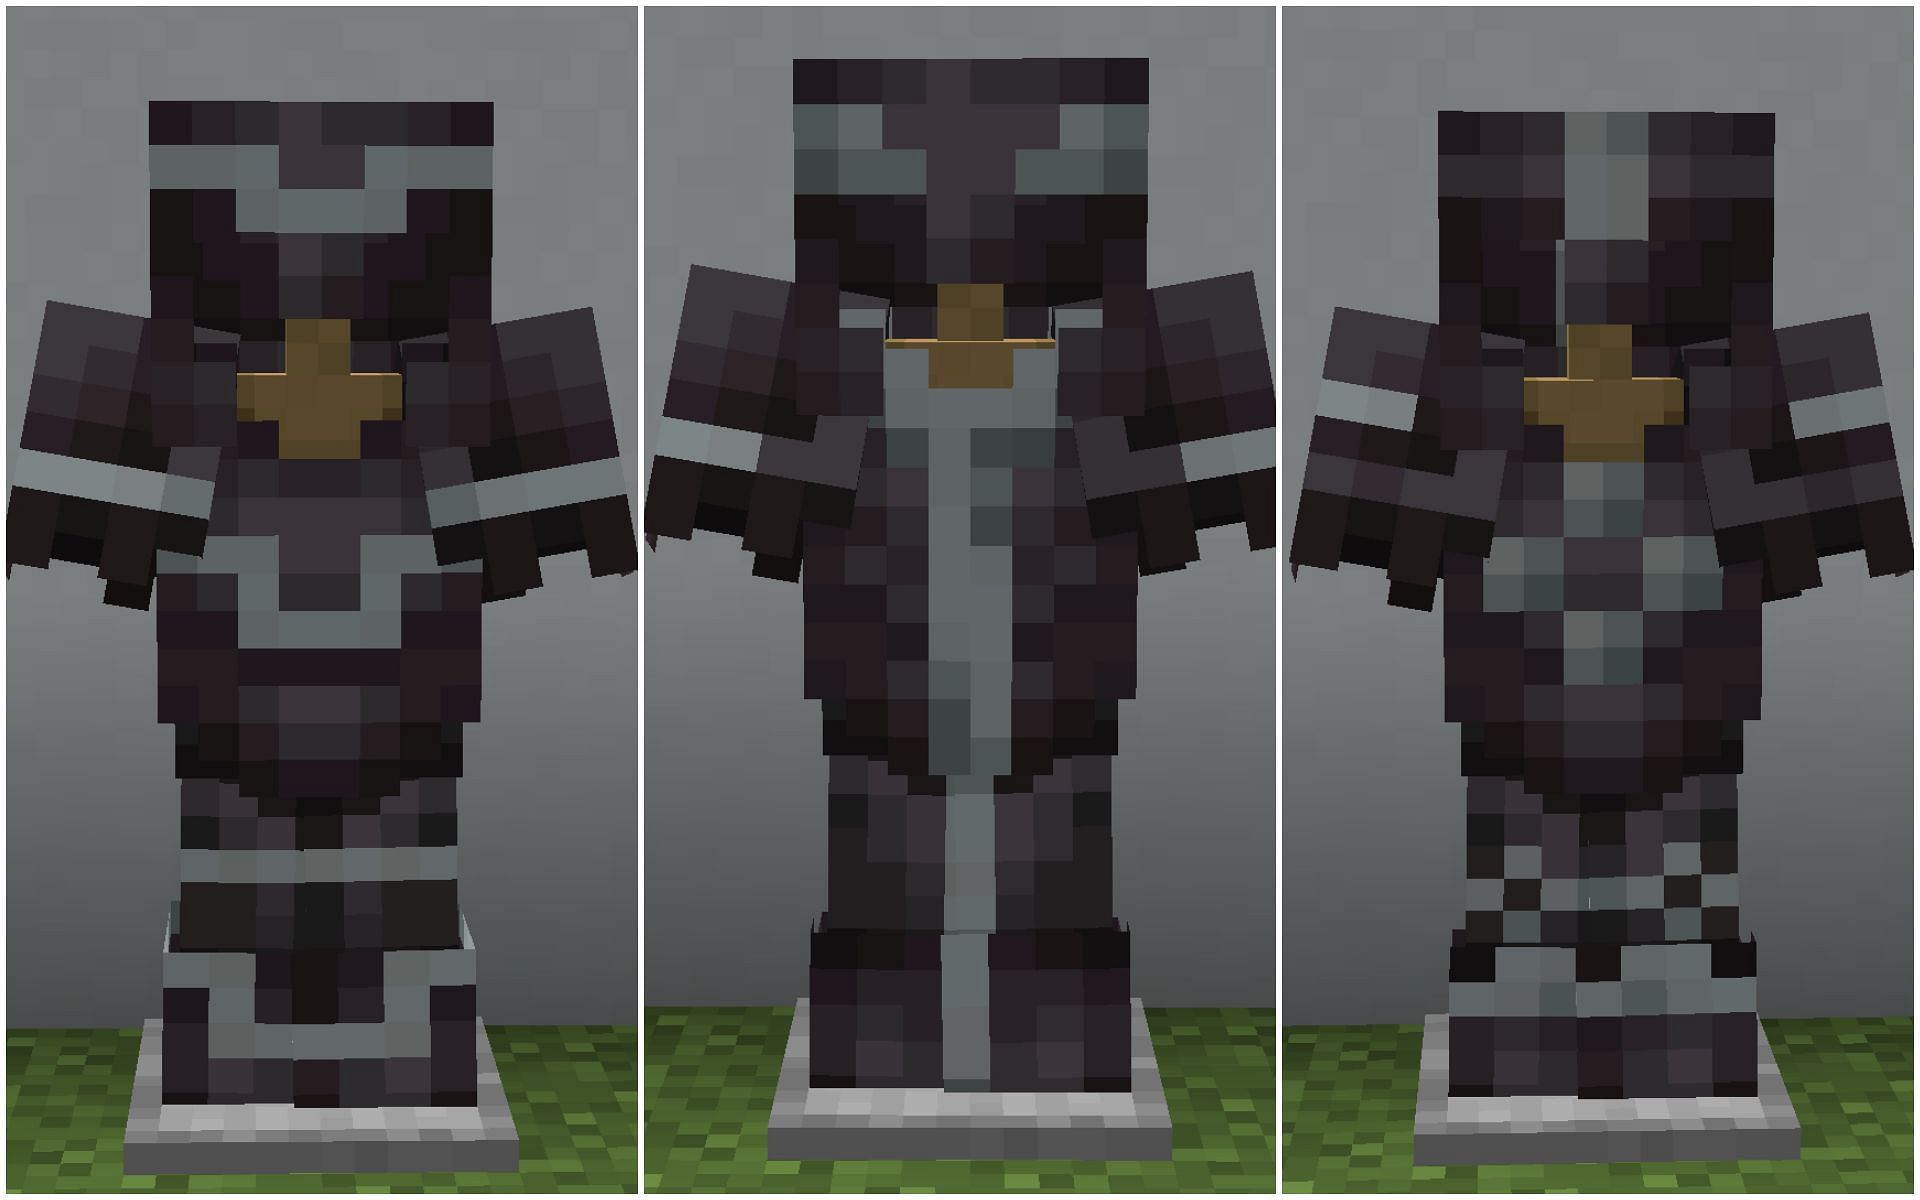 What is the strongest armor in Minecraft?